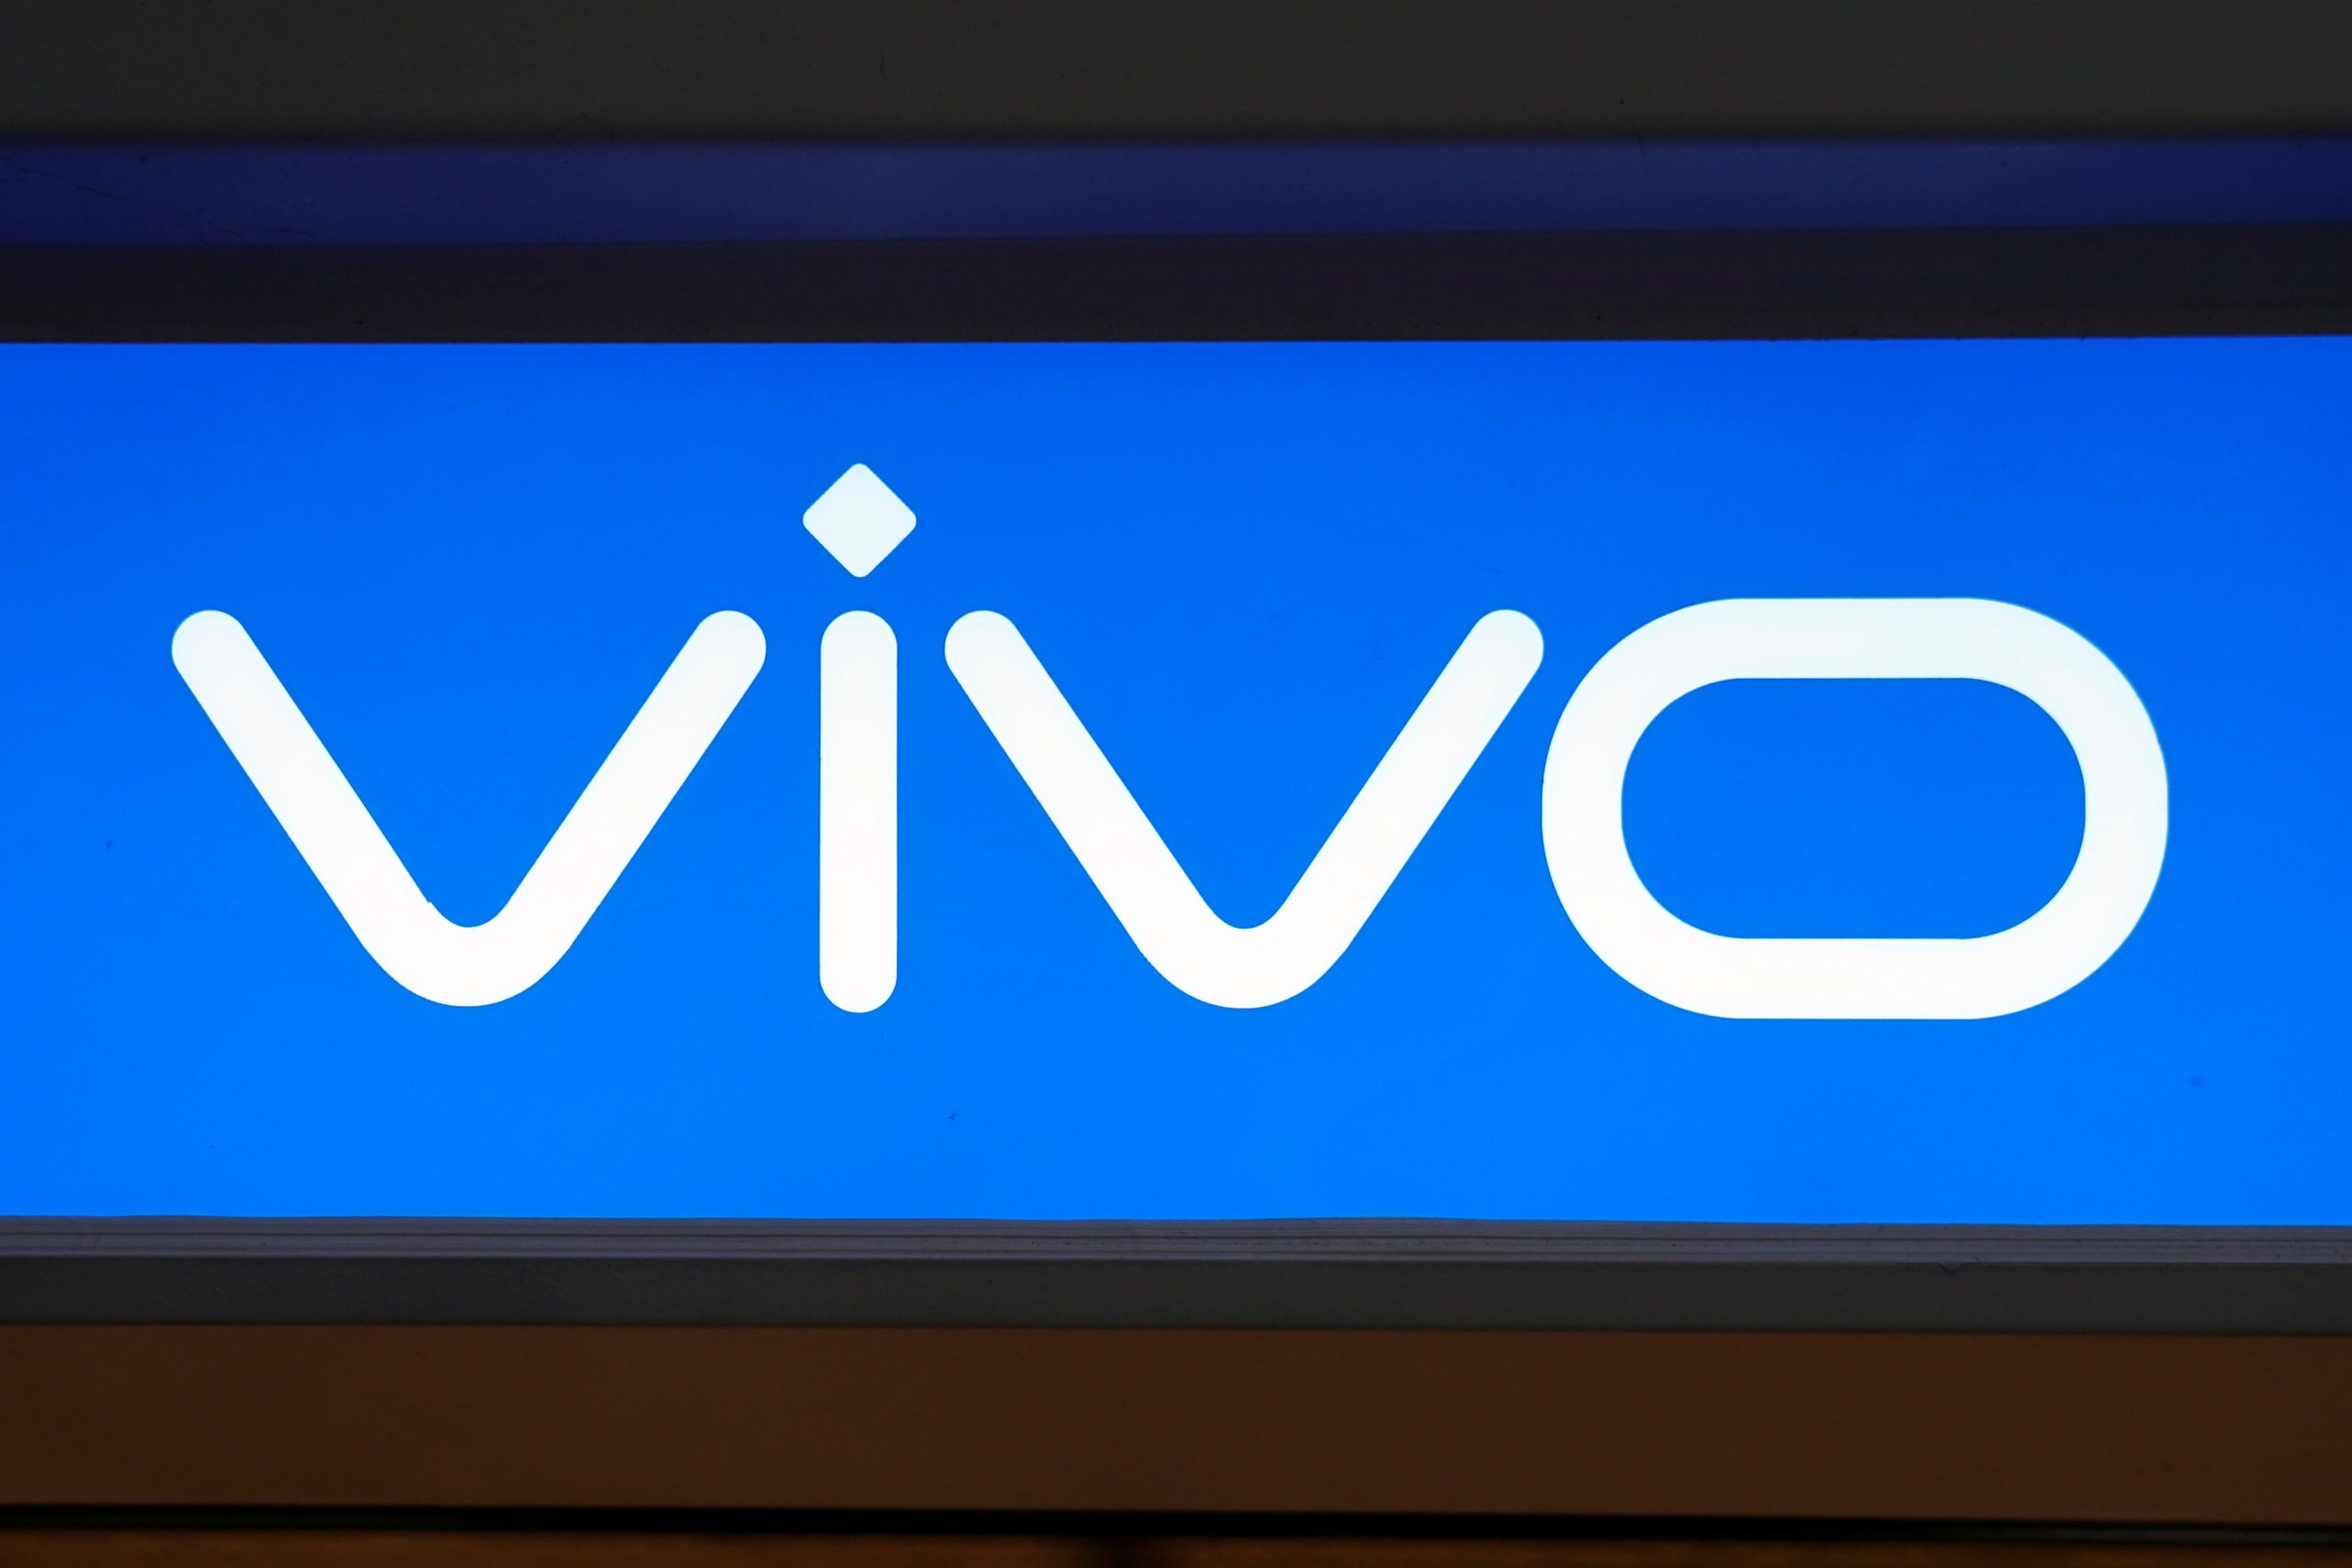 China's Vivo asks court to lift Indian bank account freeze